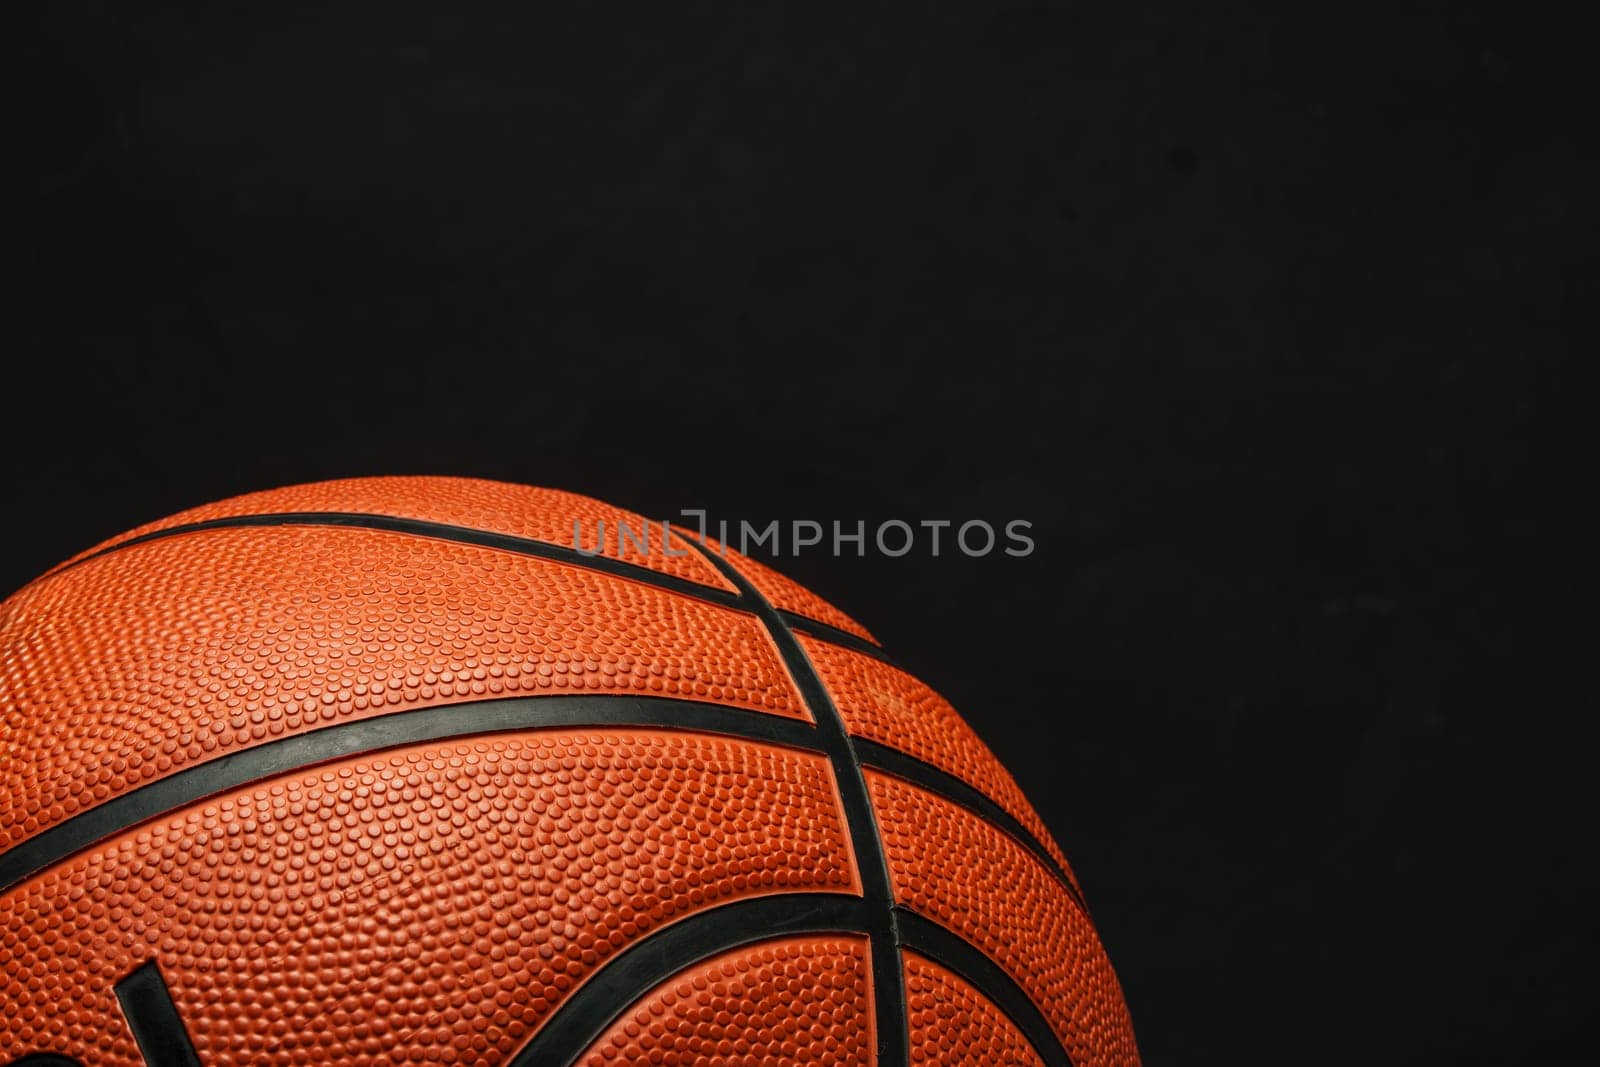 This close-up shot showcases a basketball resting on a black background. The textured surface of the basketball contrasts sharply with the dark backdrop, emphasizing its details.